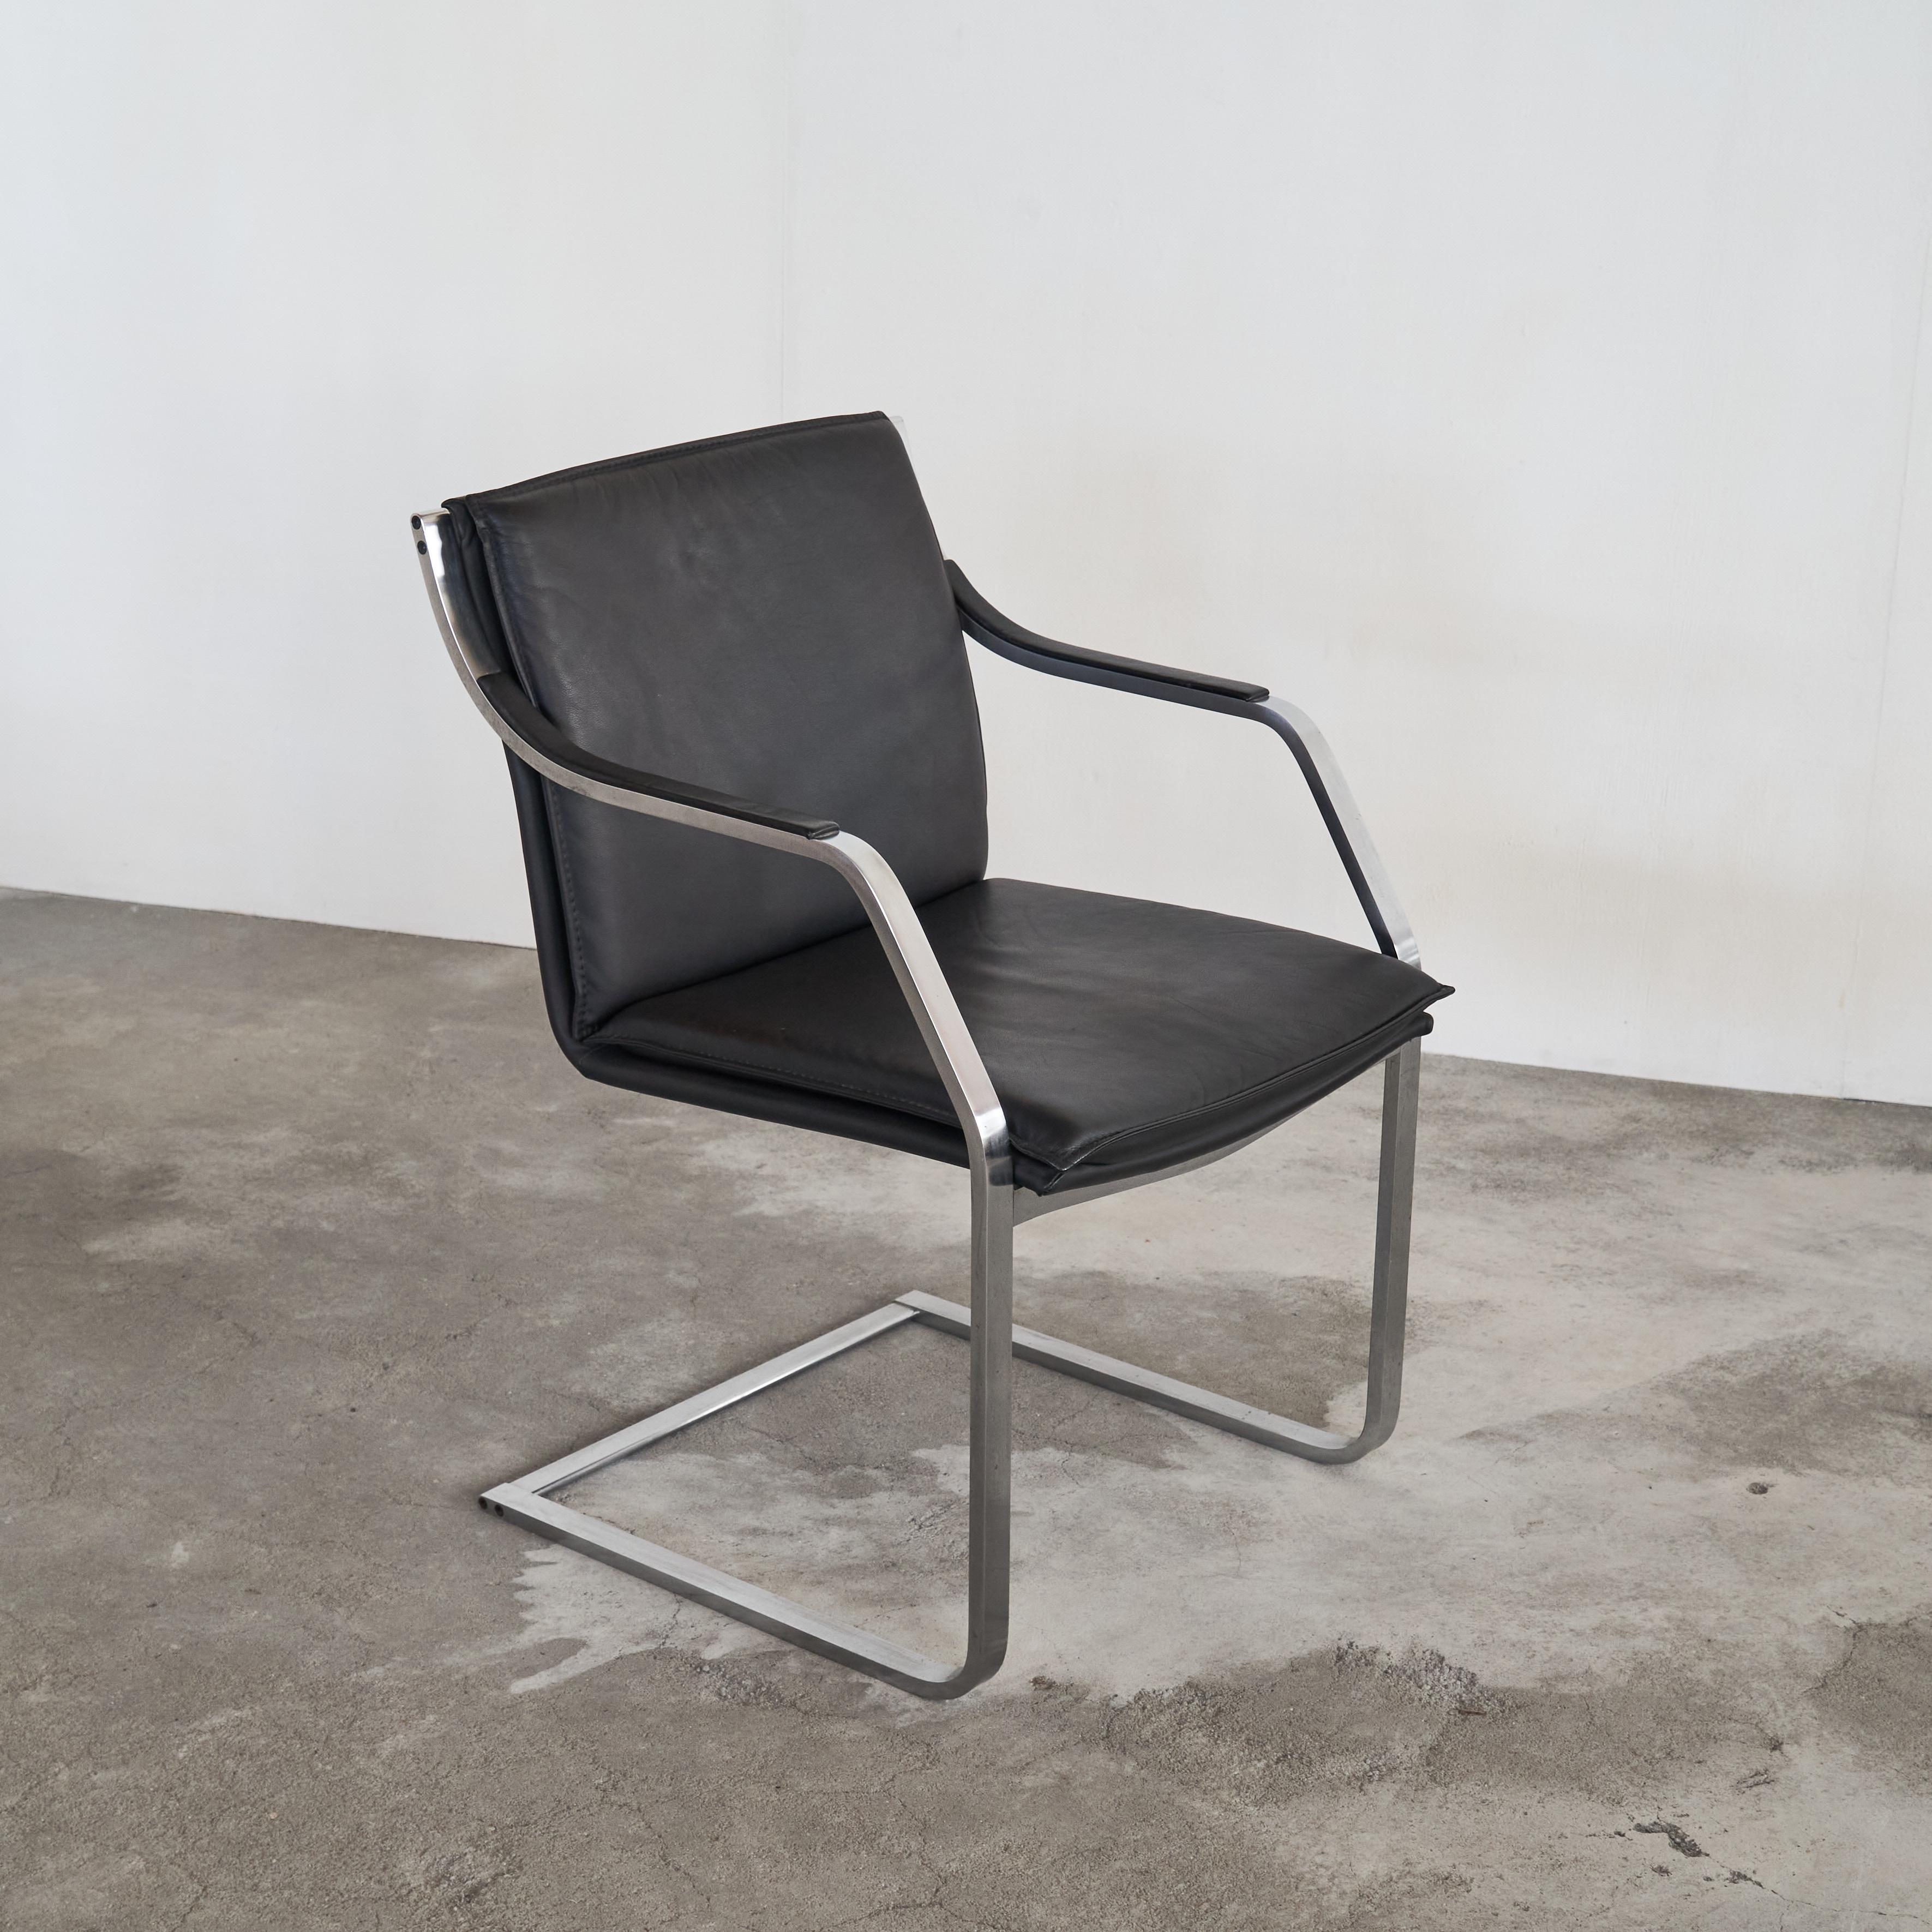 Rudolf Bernd Glatzel Armchair in Steel and Leather for Walter Knoll 1970s.

Very heavy and high quality armchair by Rudolf Bernd Glatzel for Walter Knoll Art Collection, made in the 1970s. The chair features a modern and timeless appearance, due to